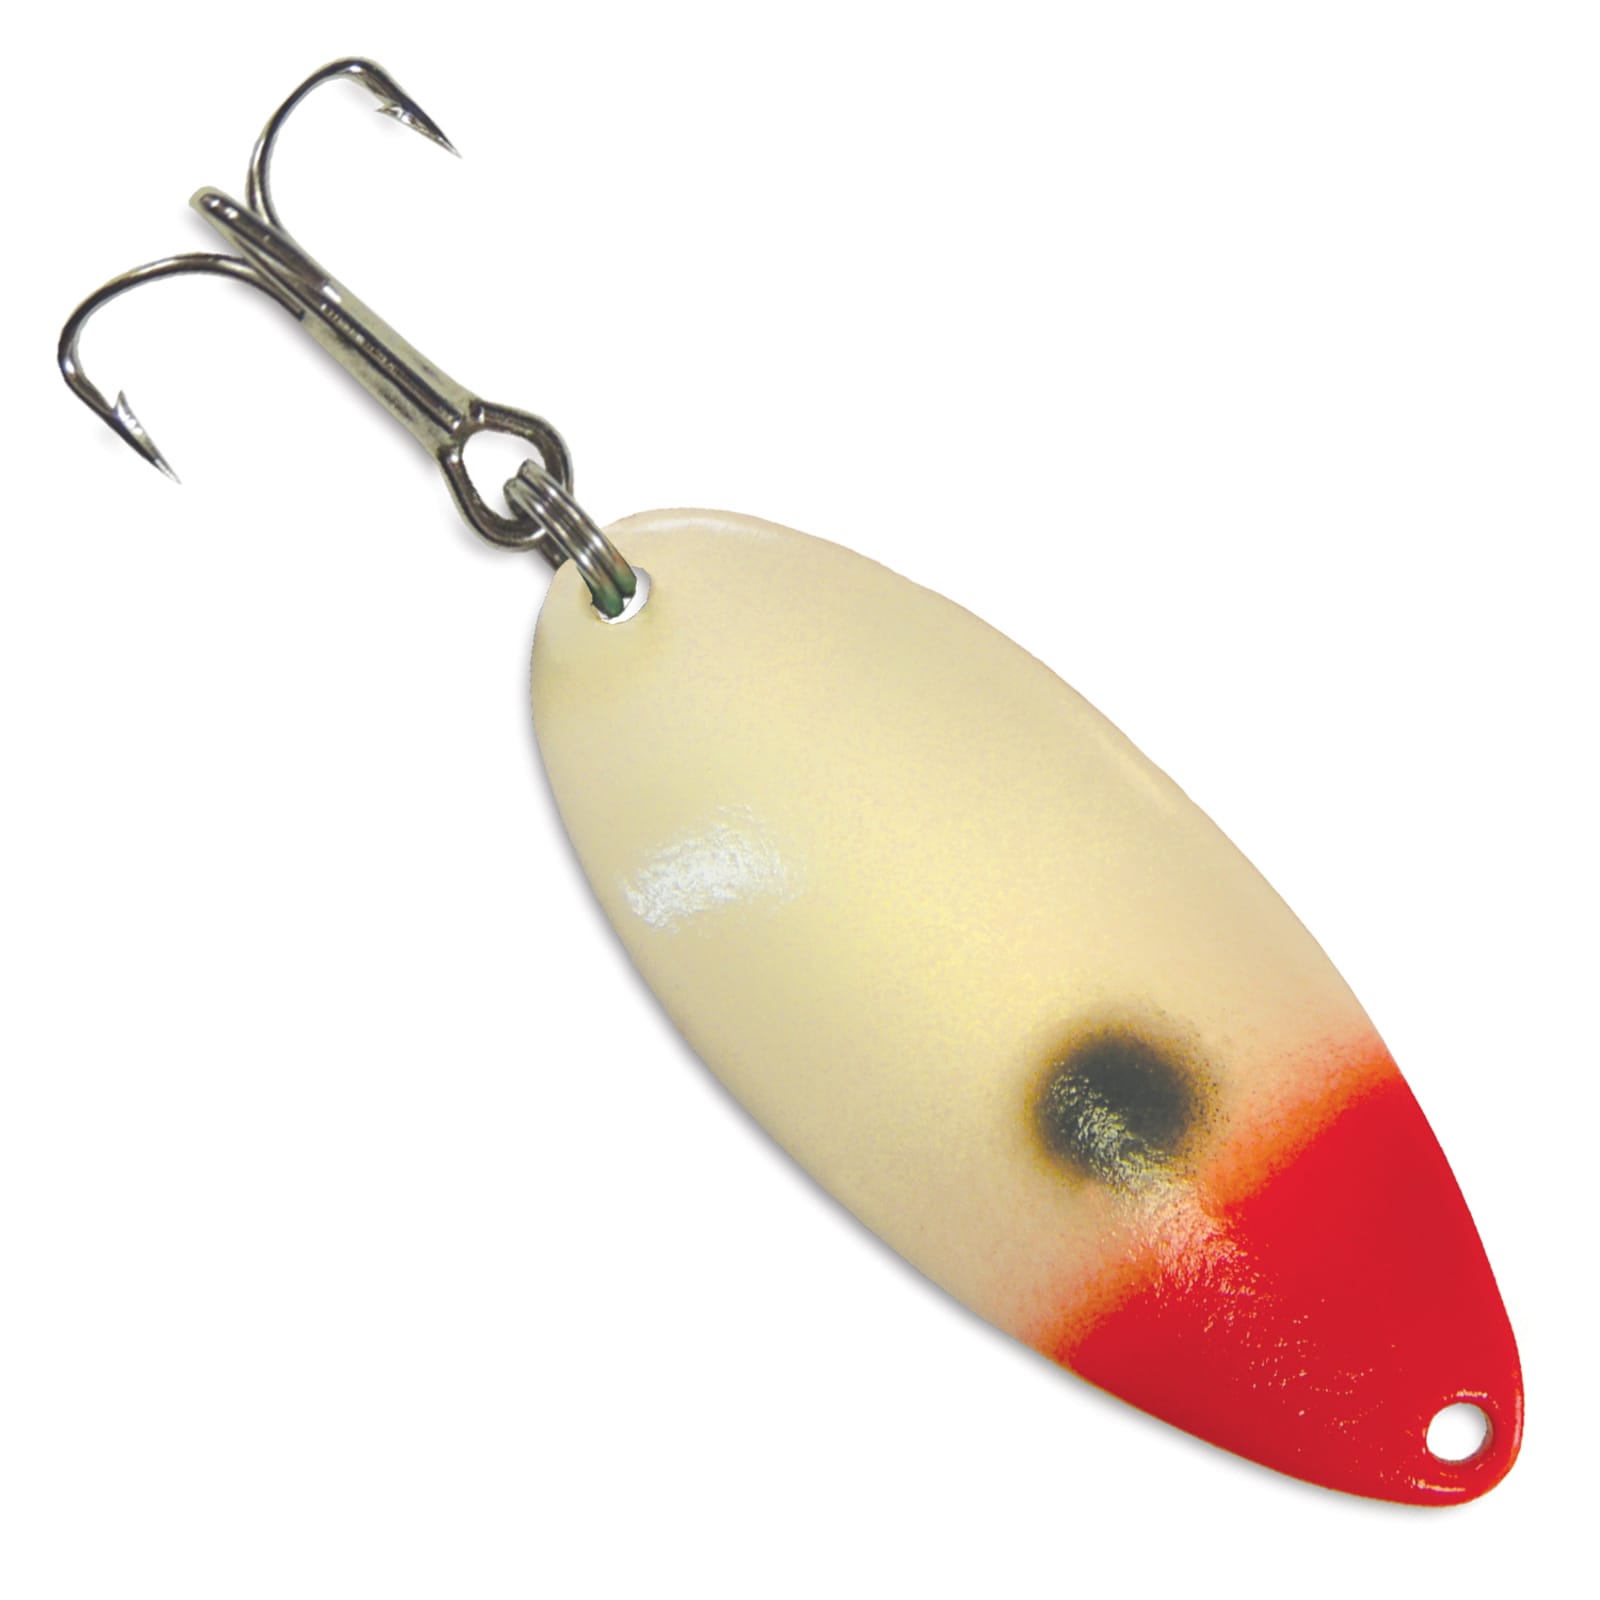 Little Cleo Spoon - Bloody Nose by Acme Tackle Company at Fleet Farm